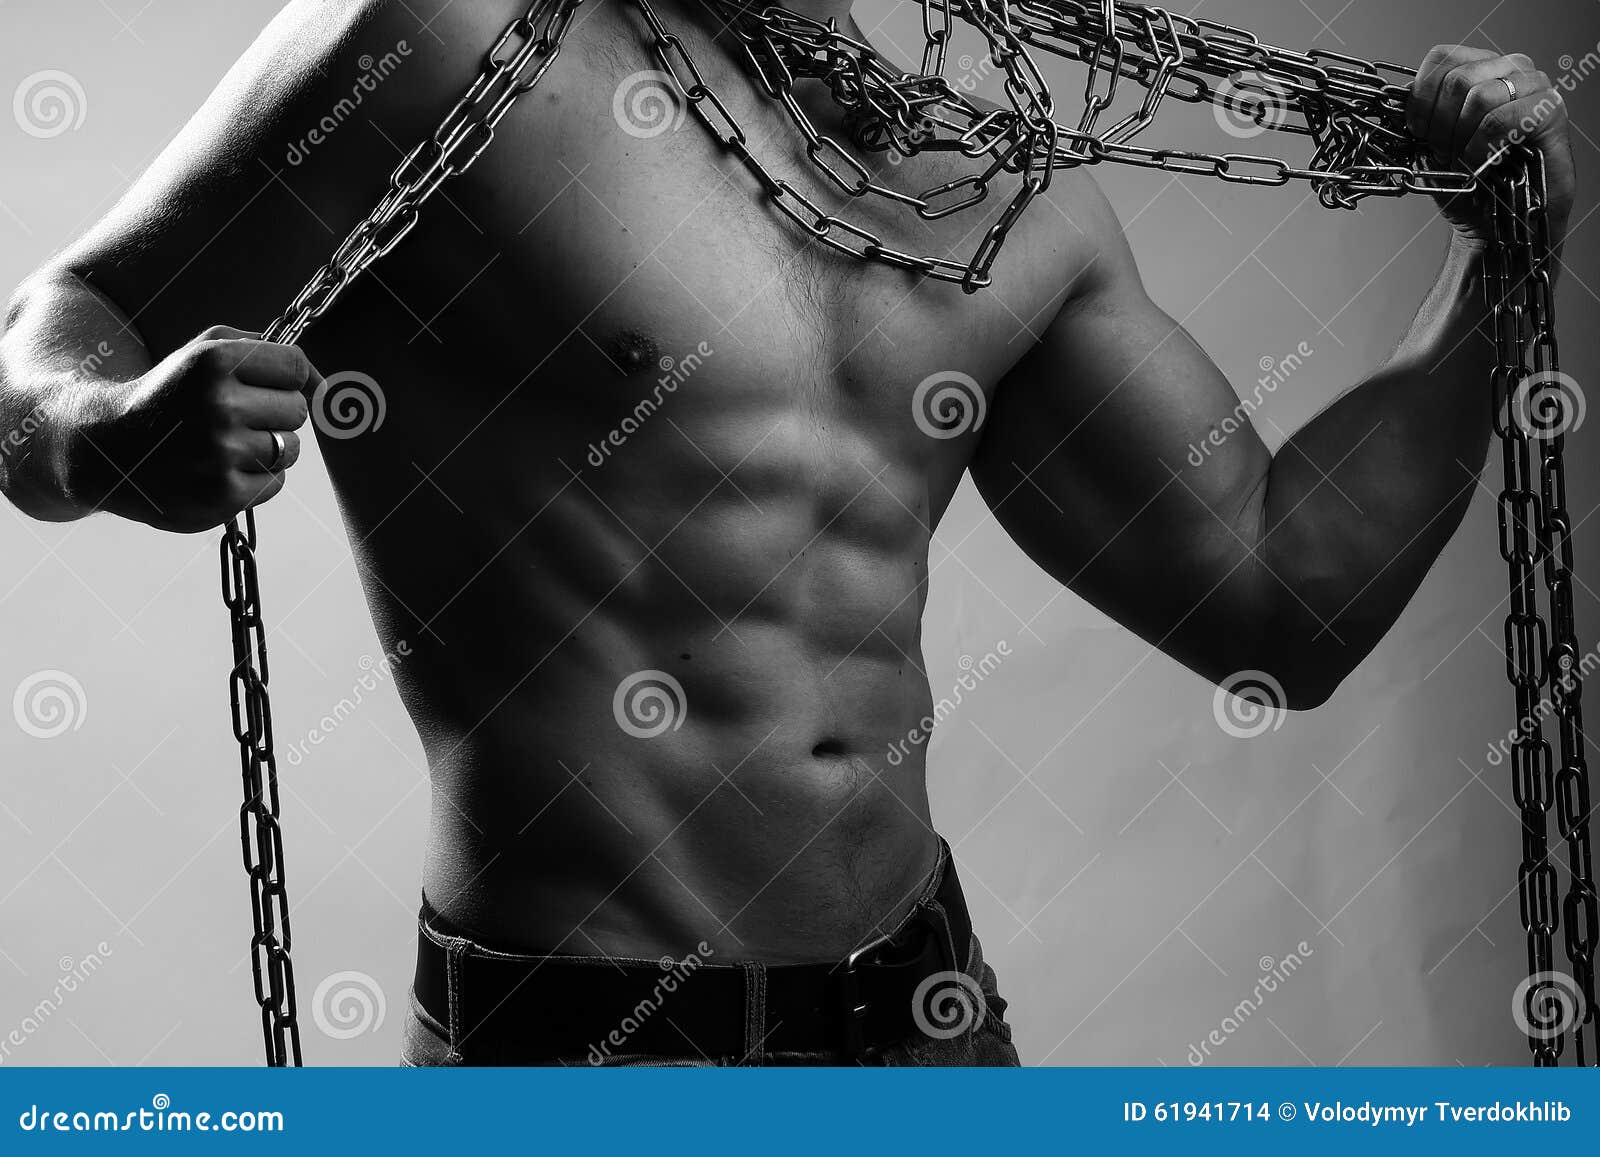 Muscular man with rope stock photo pic